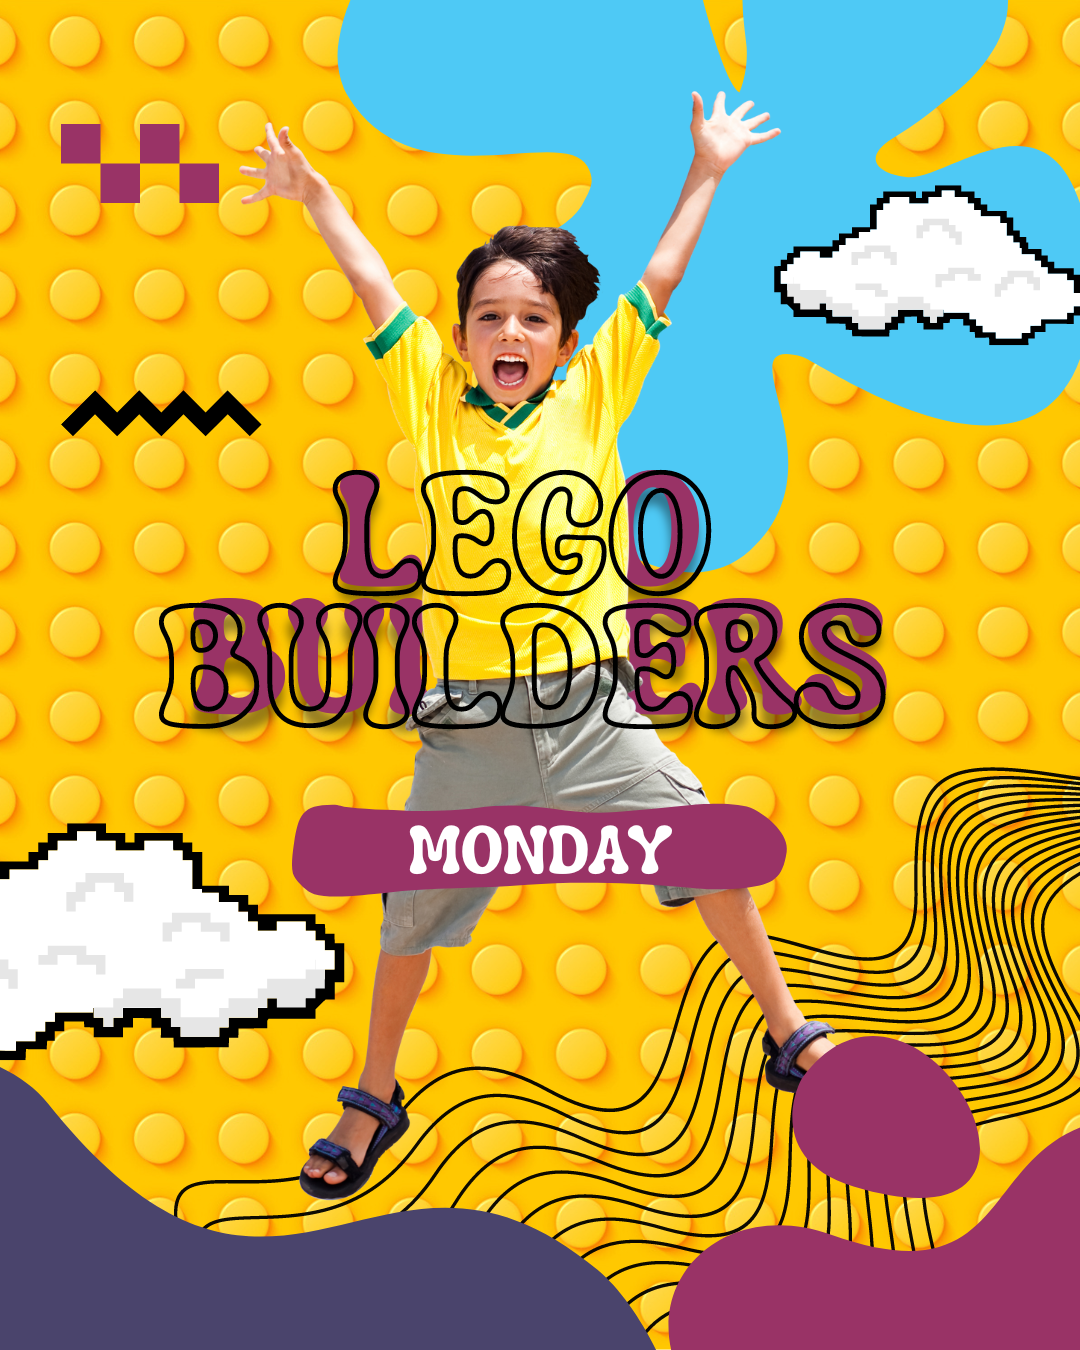 Lego Builders - Wind down after school @ Mechanicville District Public Library | Mechanicville | New York | United States